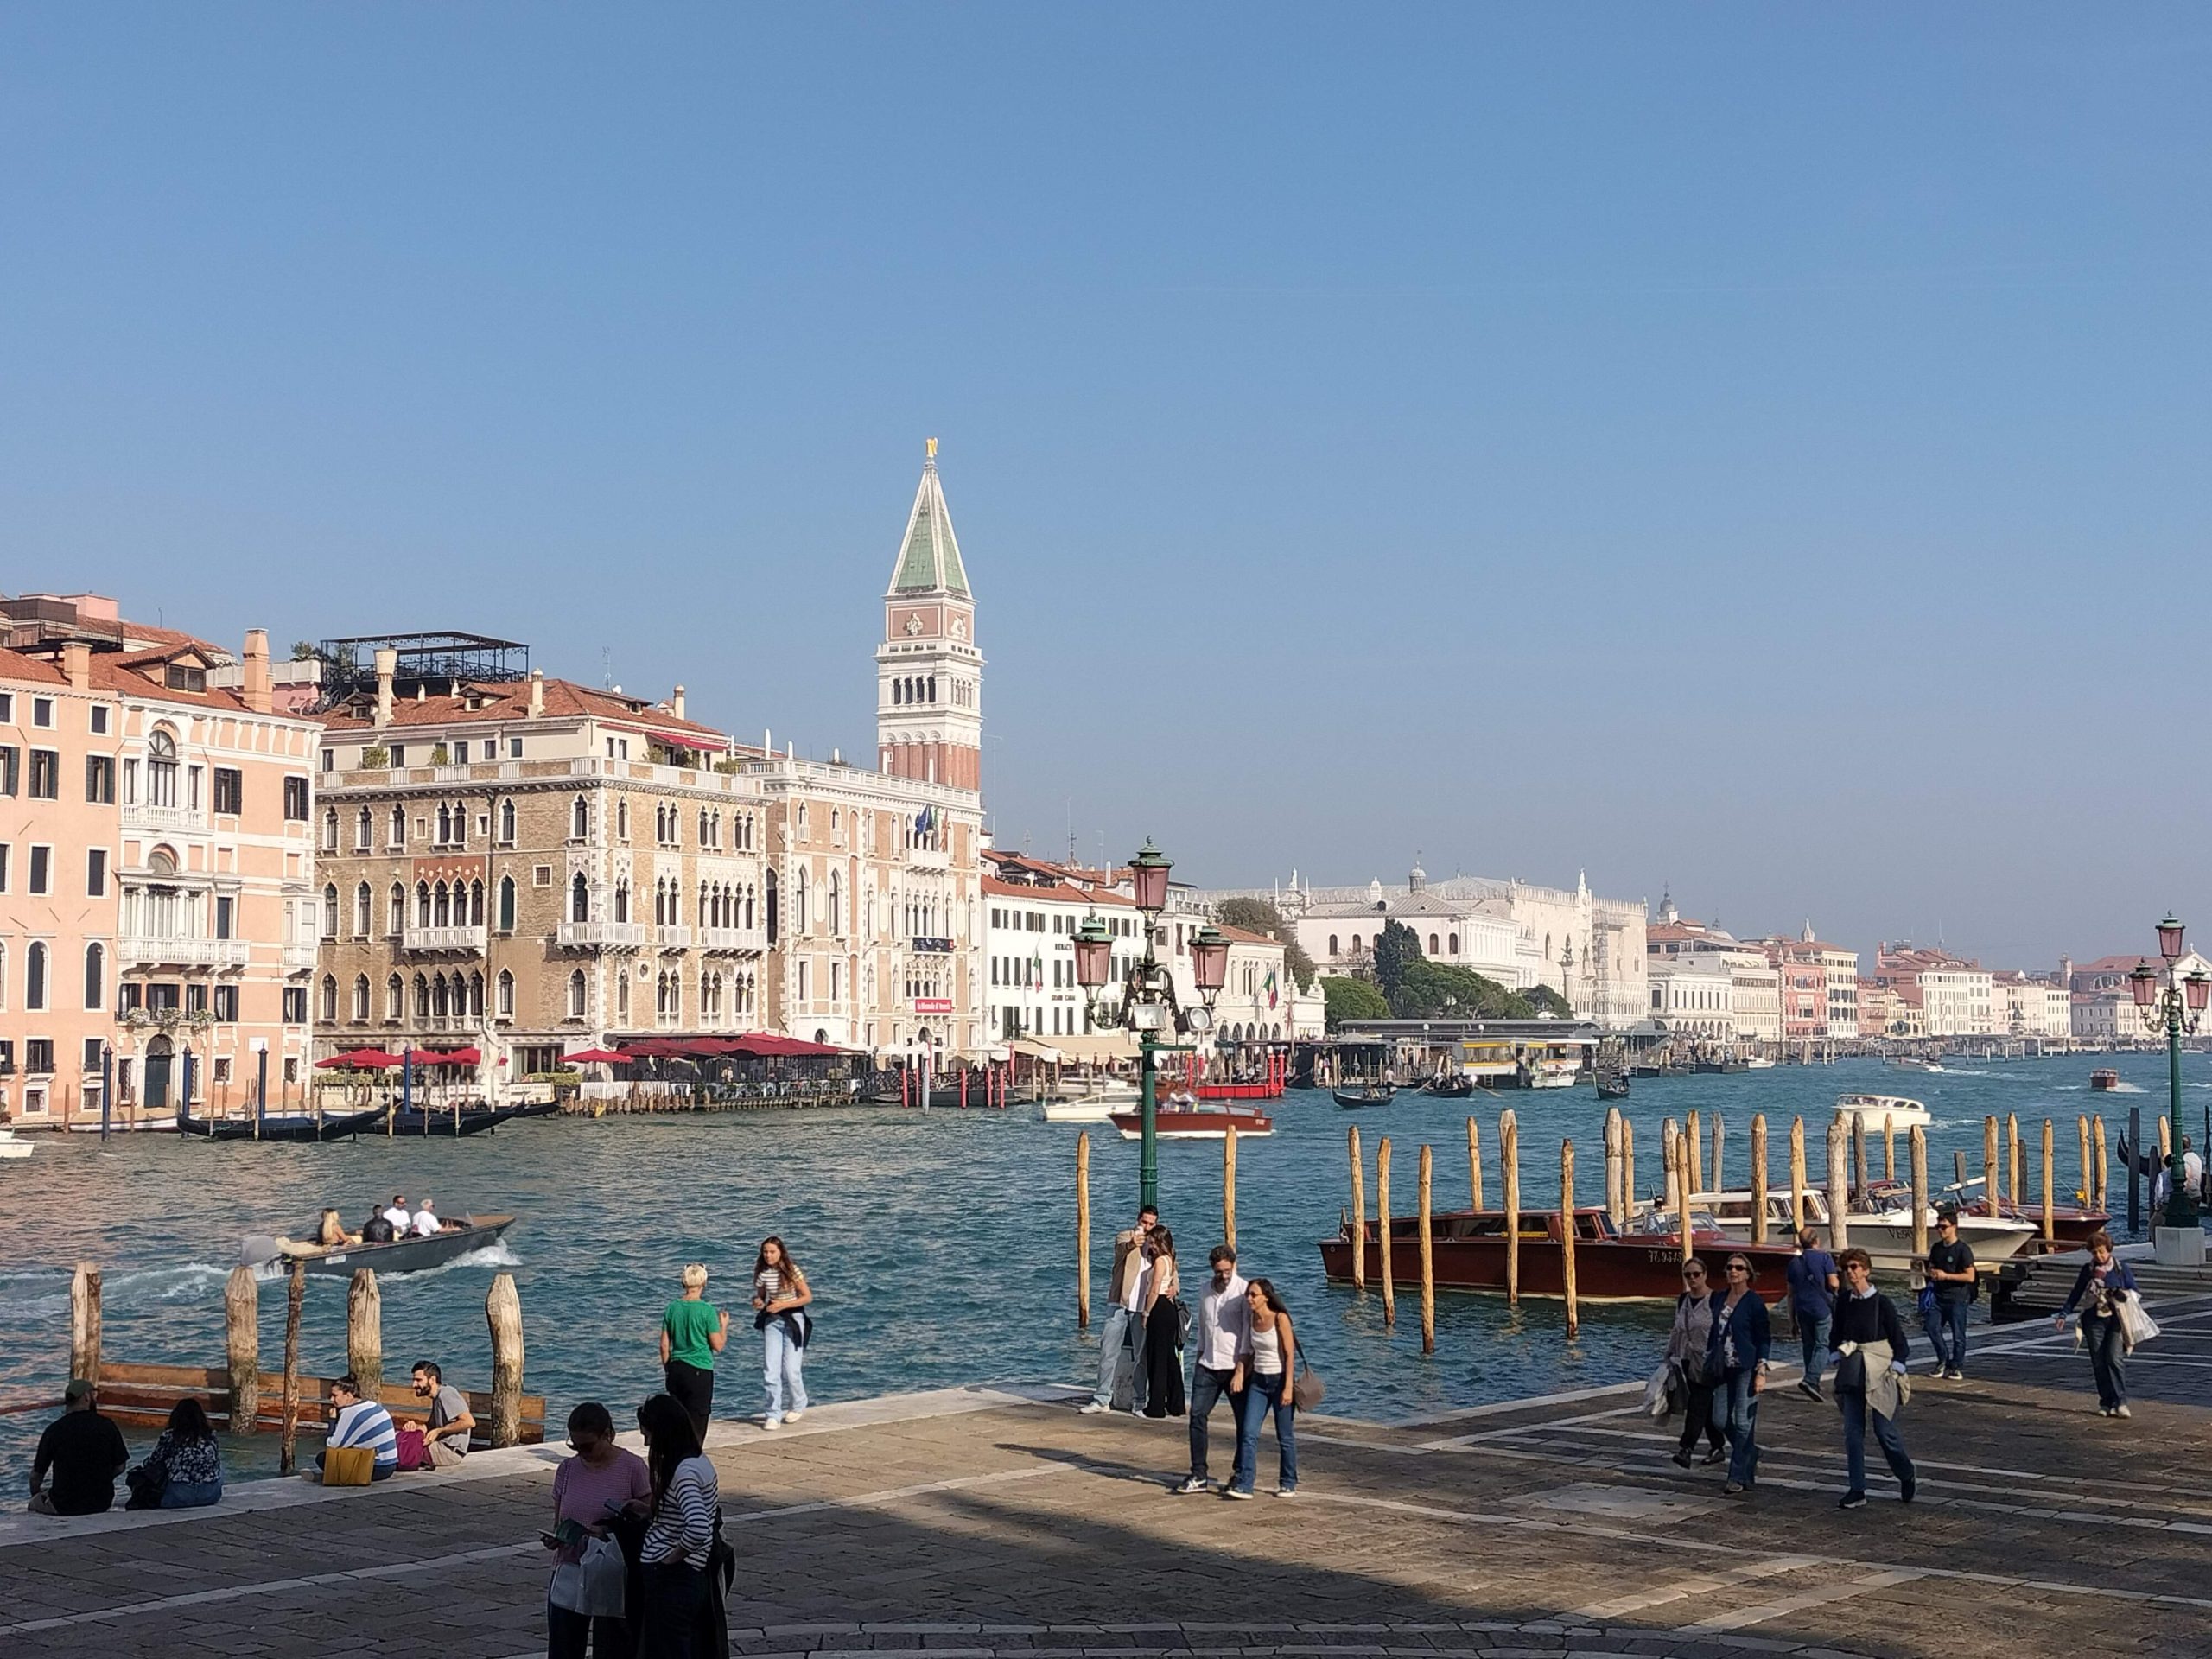 Venice could be on World Heritage in Danger list